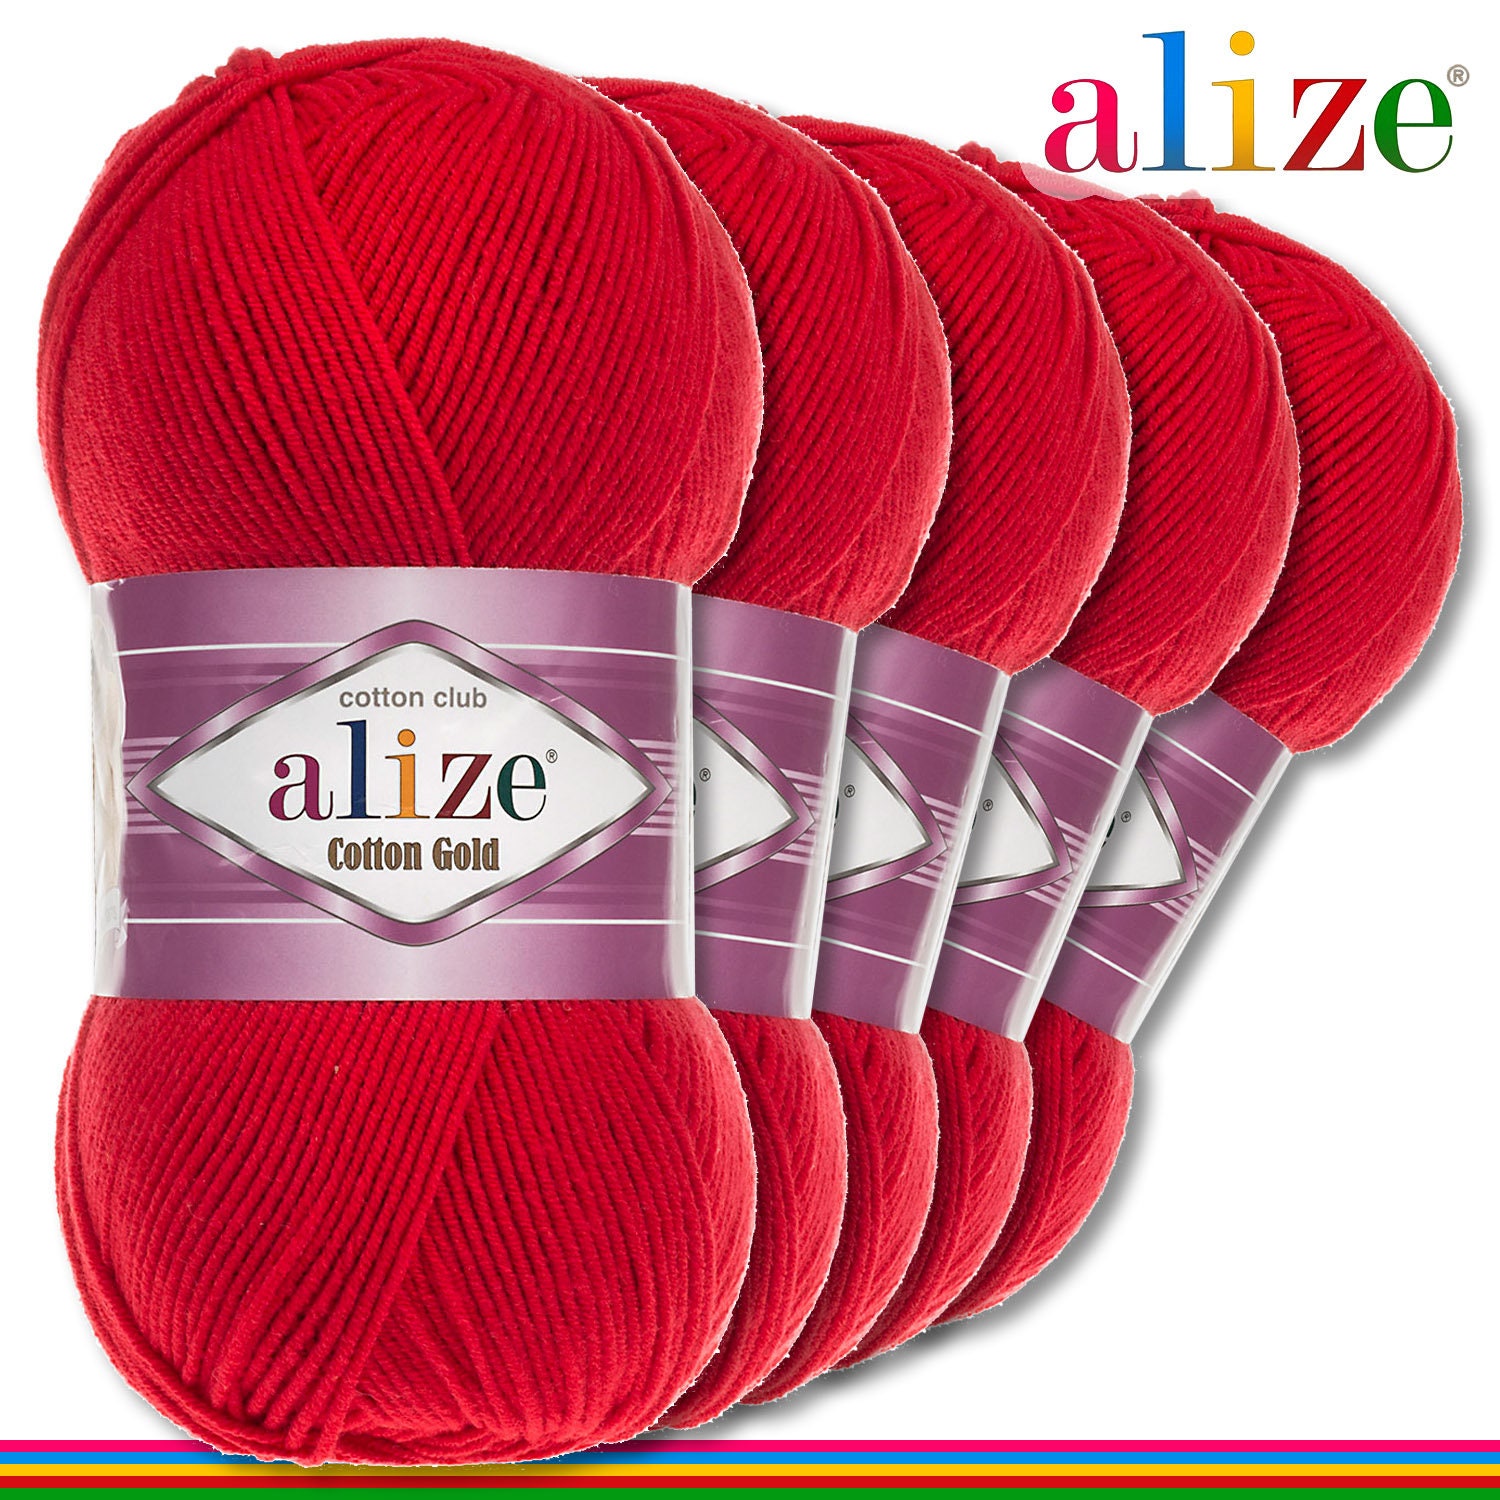 Alize 5 x 100 g Cotton Gold PREMIUM Wolle 55% Wolle-45% AcrylFuchsia 149 